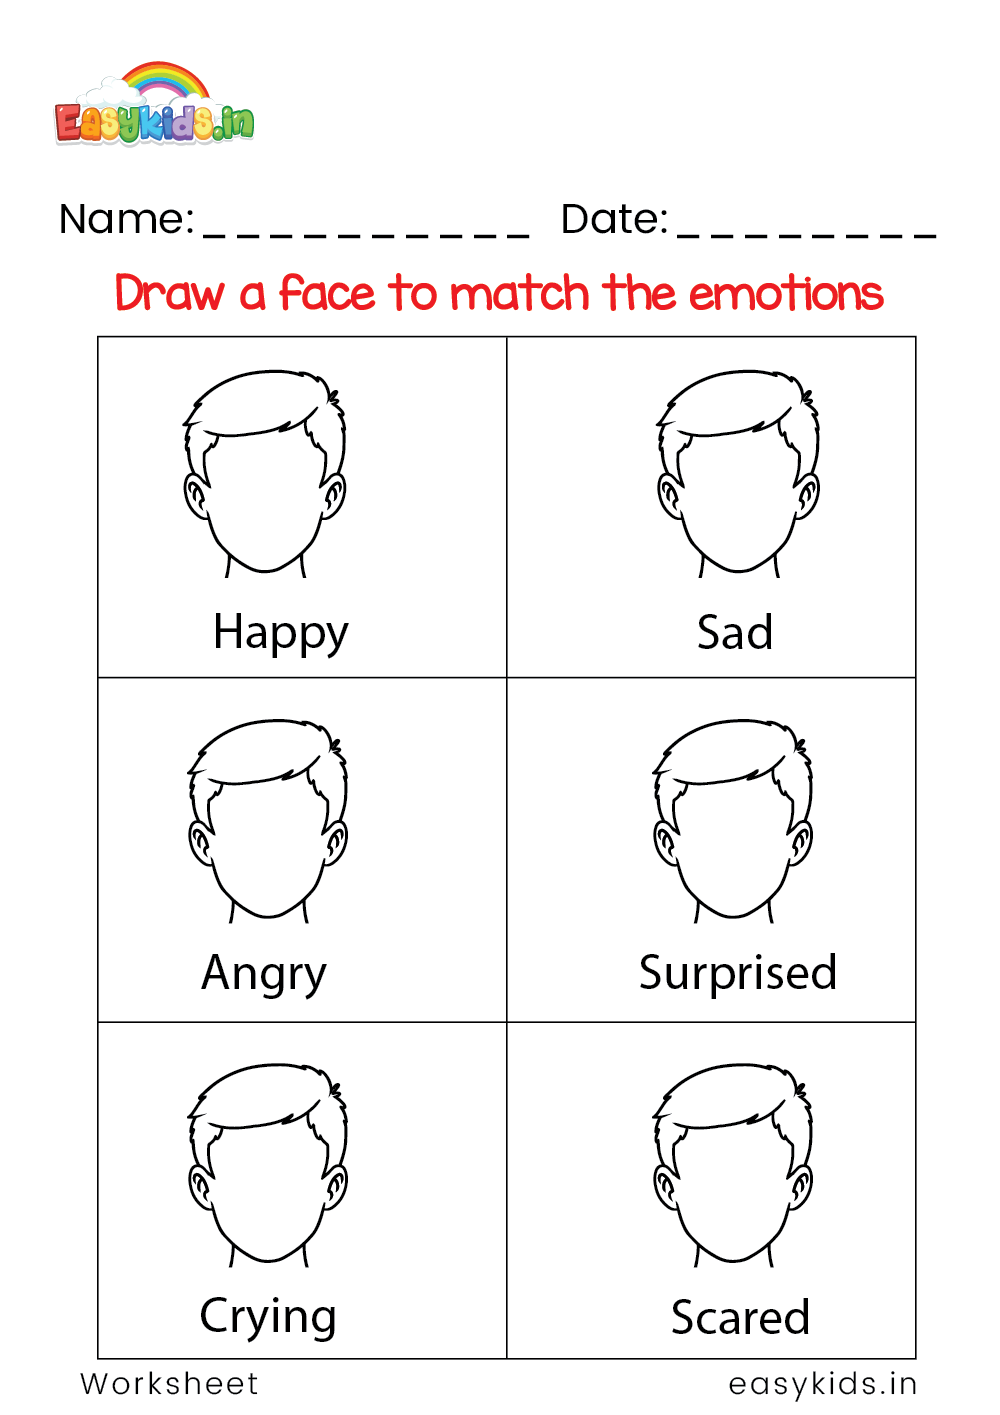 Draw a face to match the emotions worksheet - EasyKids.in